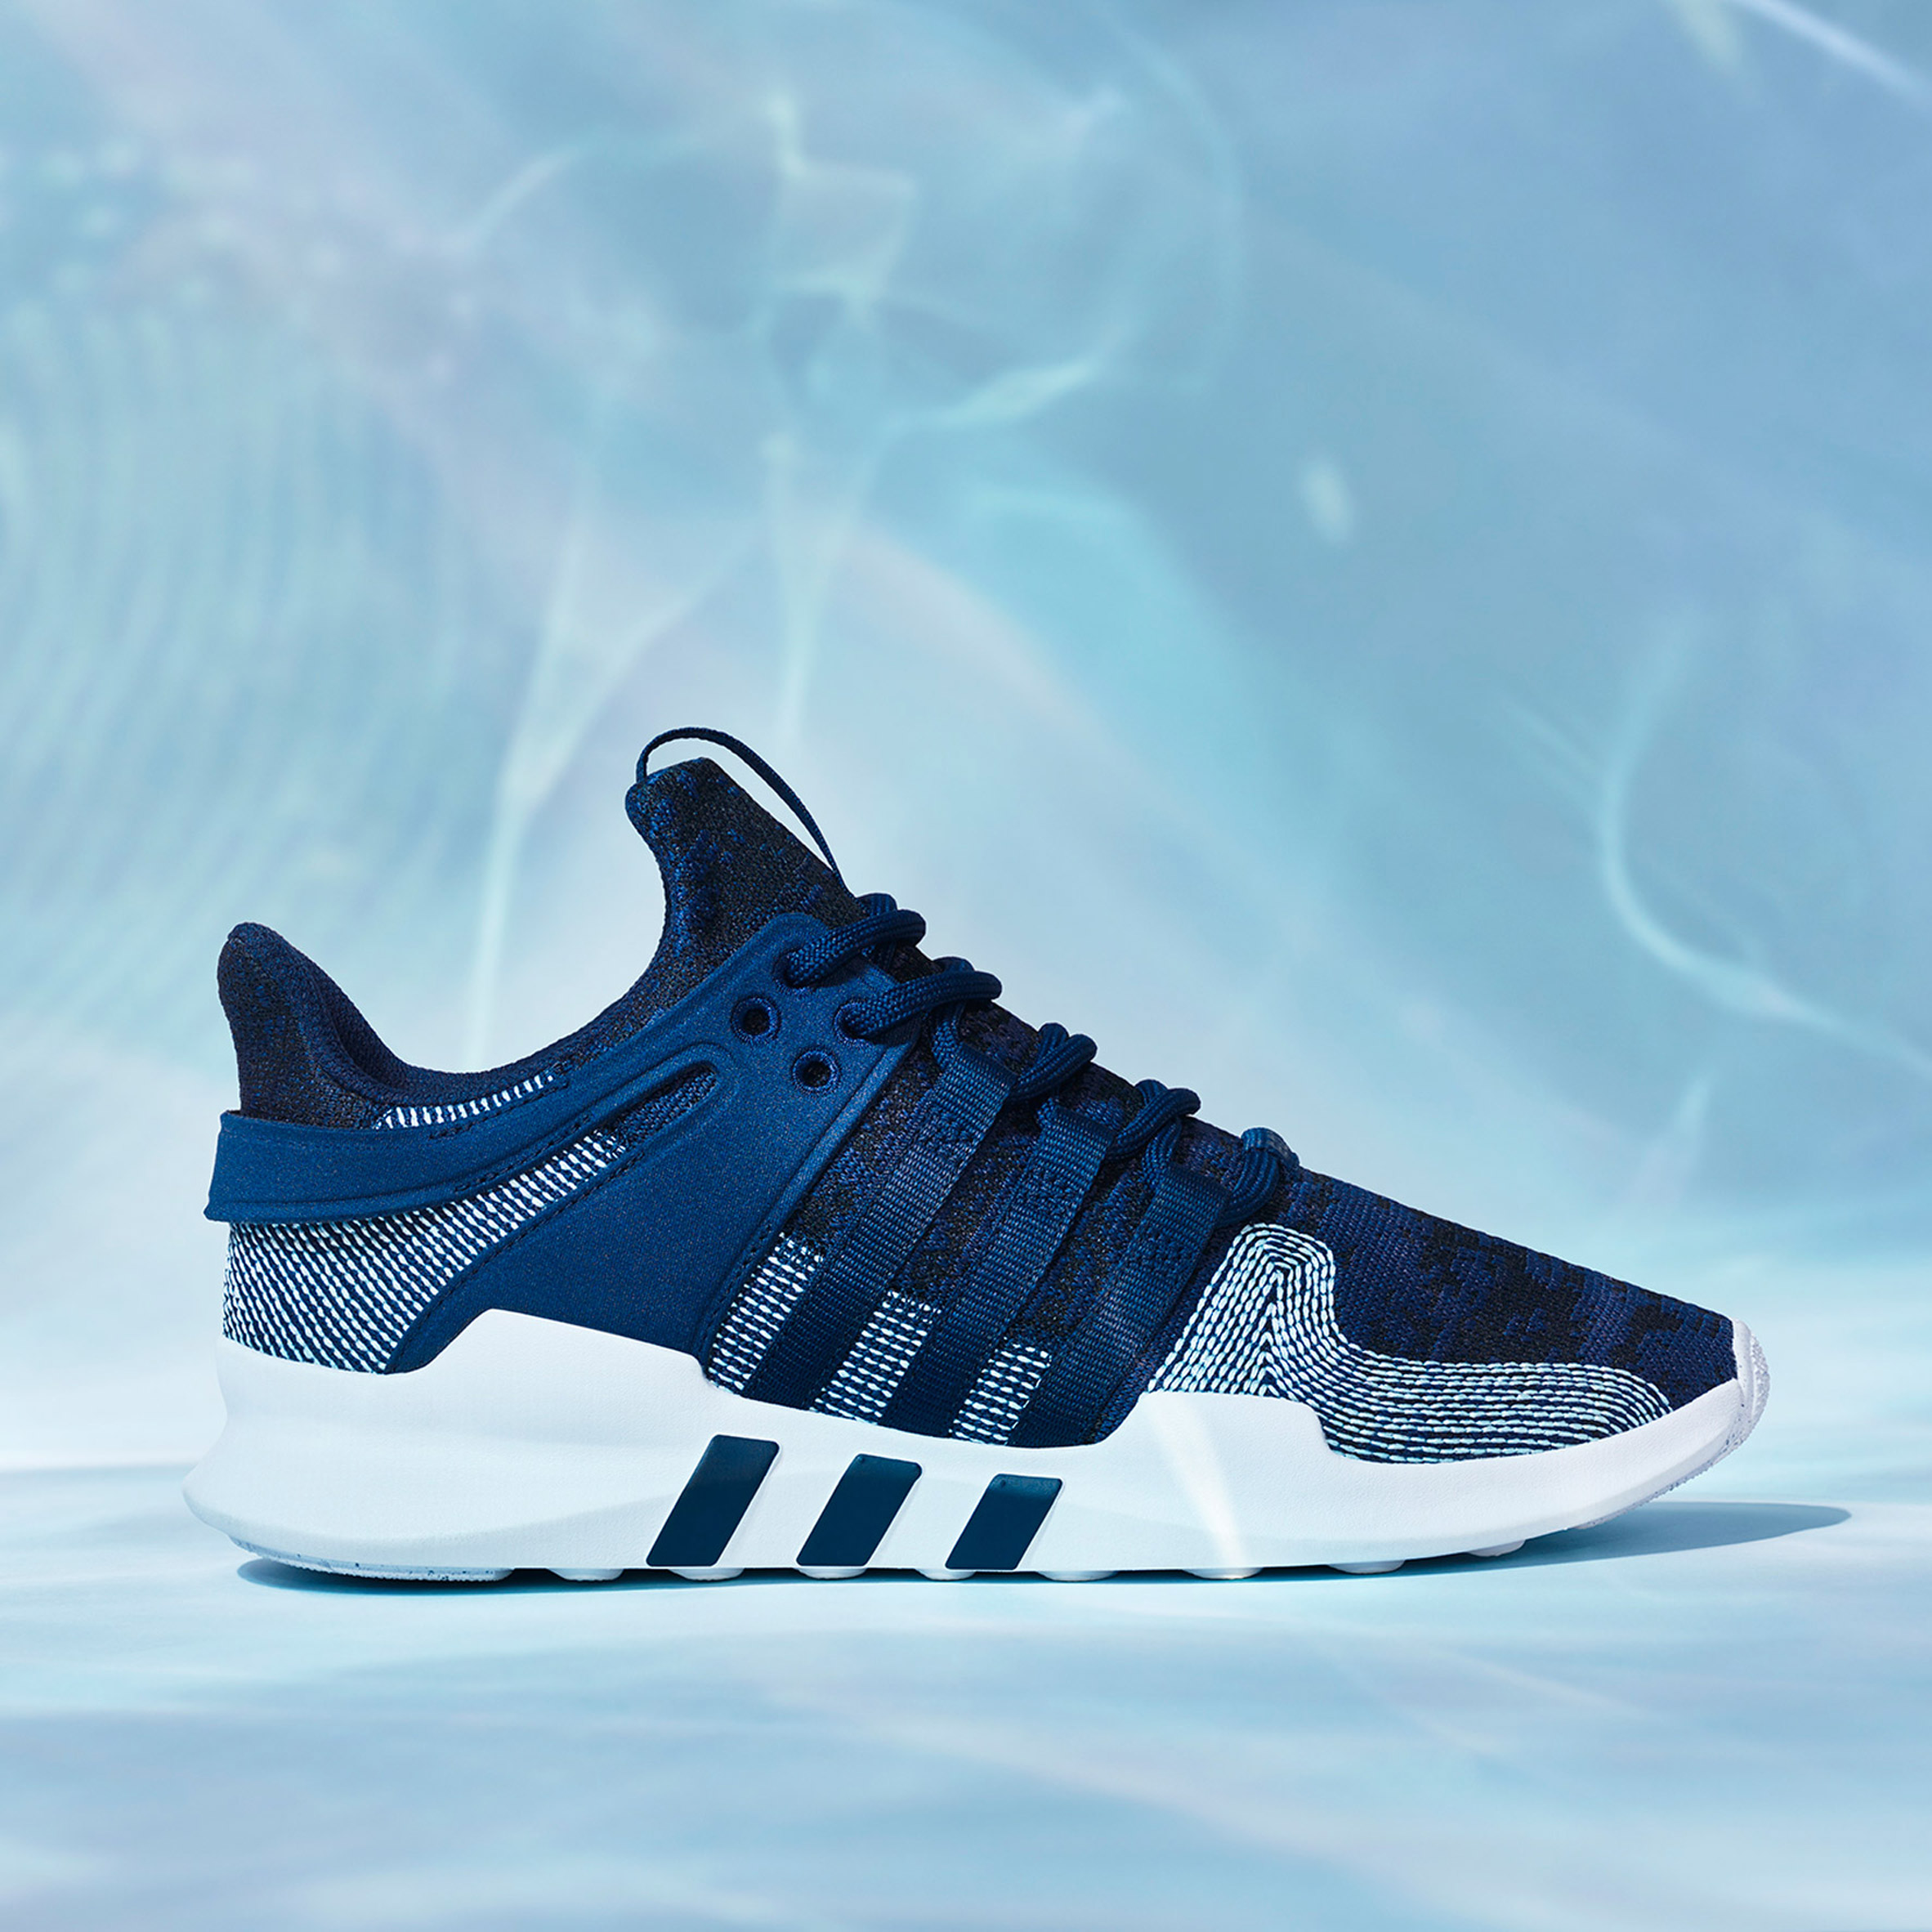 Adidas uses Parley ocean to update one of classic designs